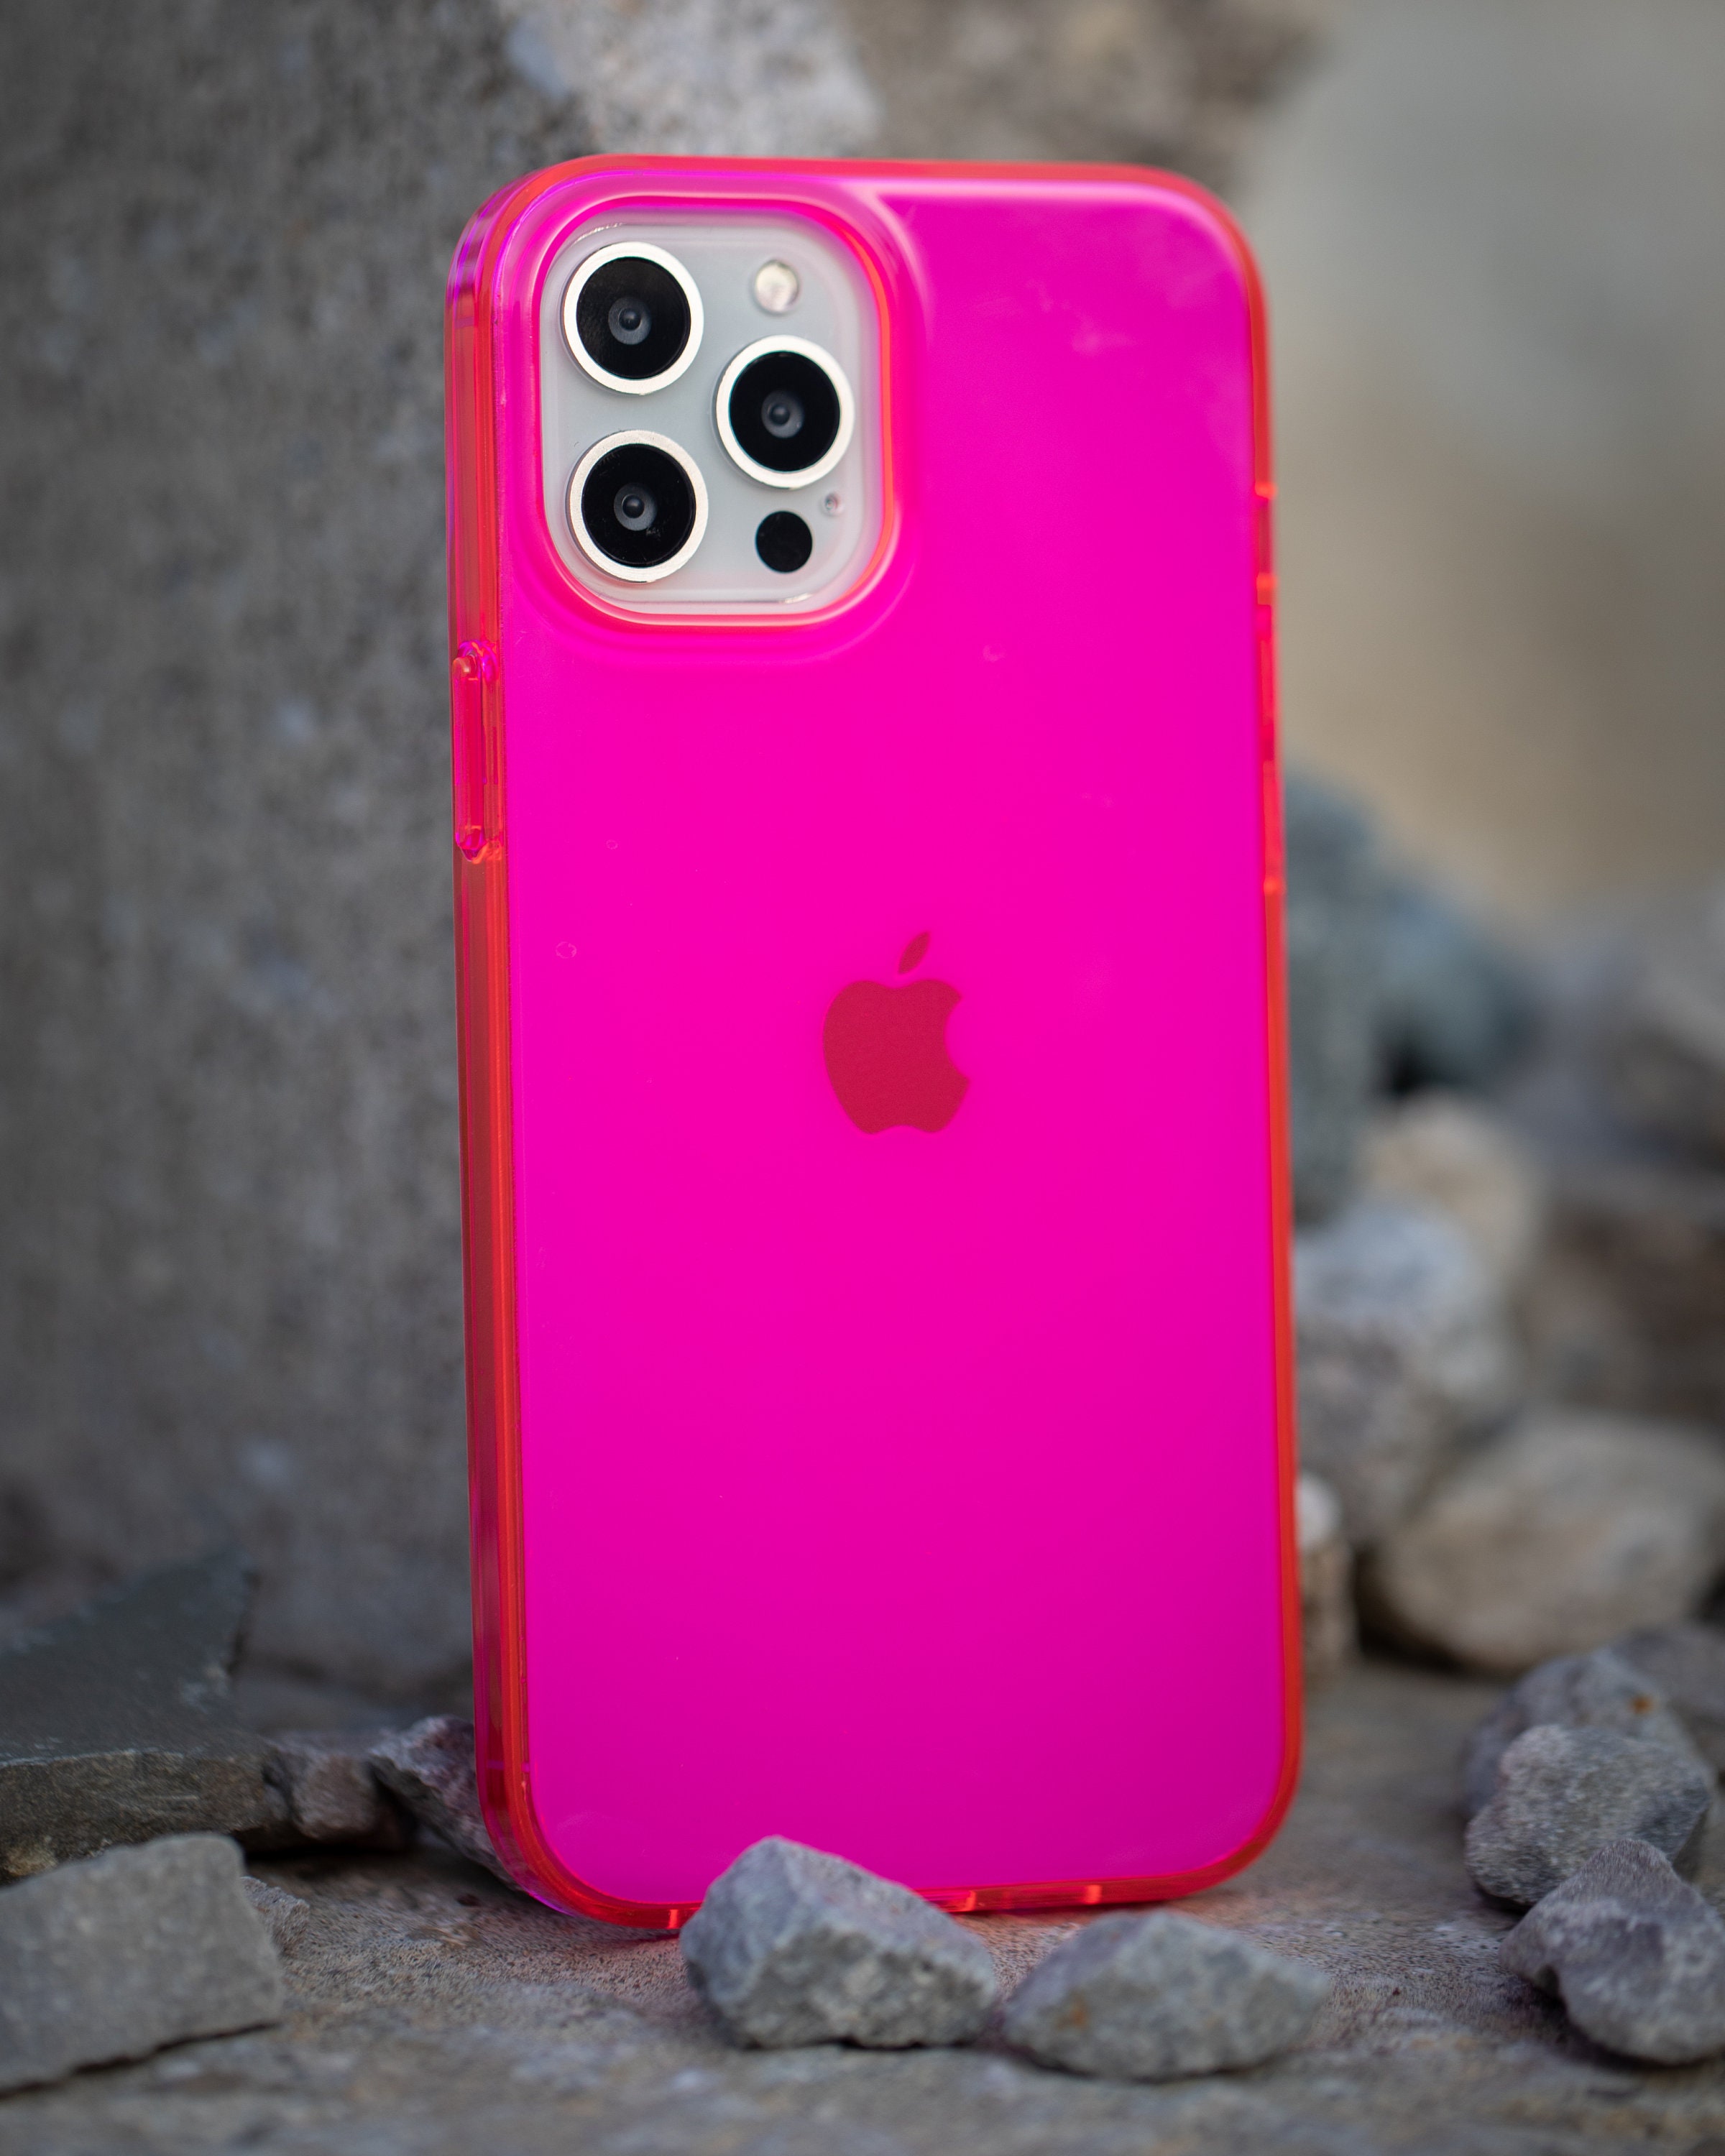 NYCPrimeTech iPhone 12 Pro Max Case/Slim and Soft Transparent Neon Pink Cover Wi